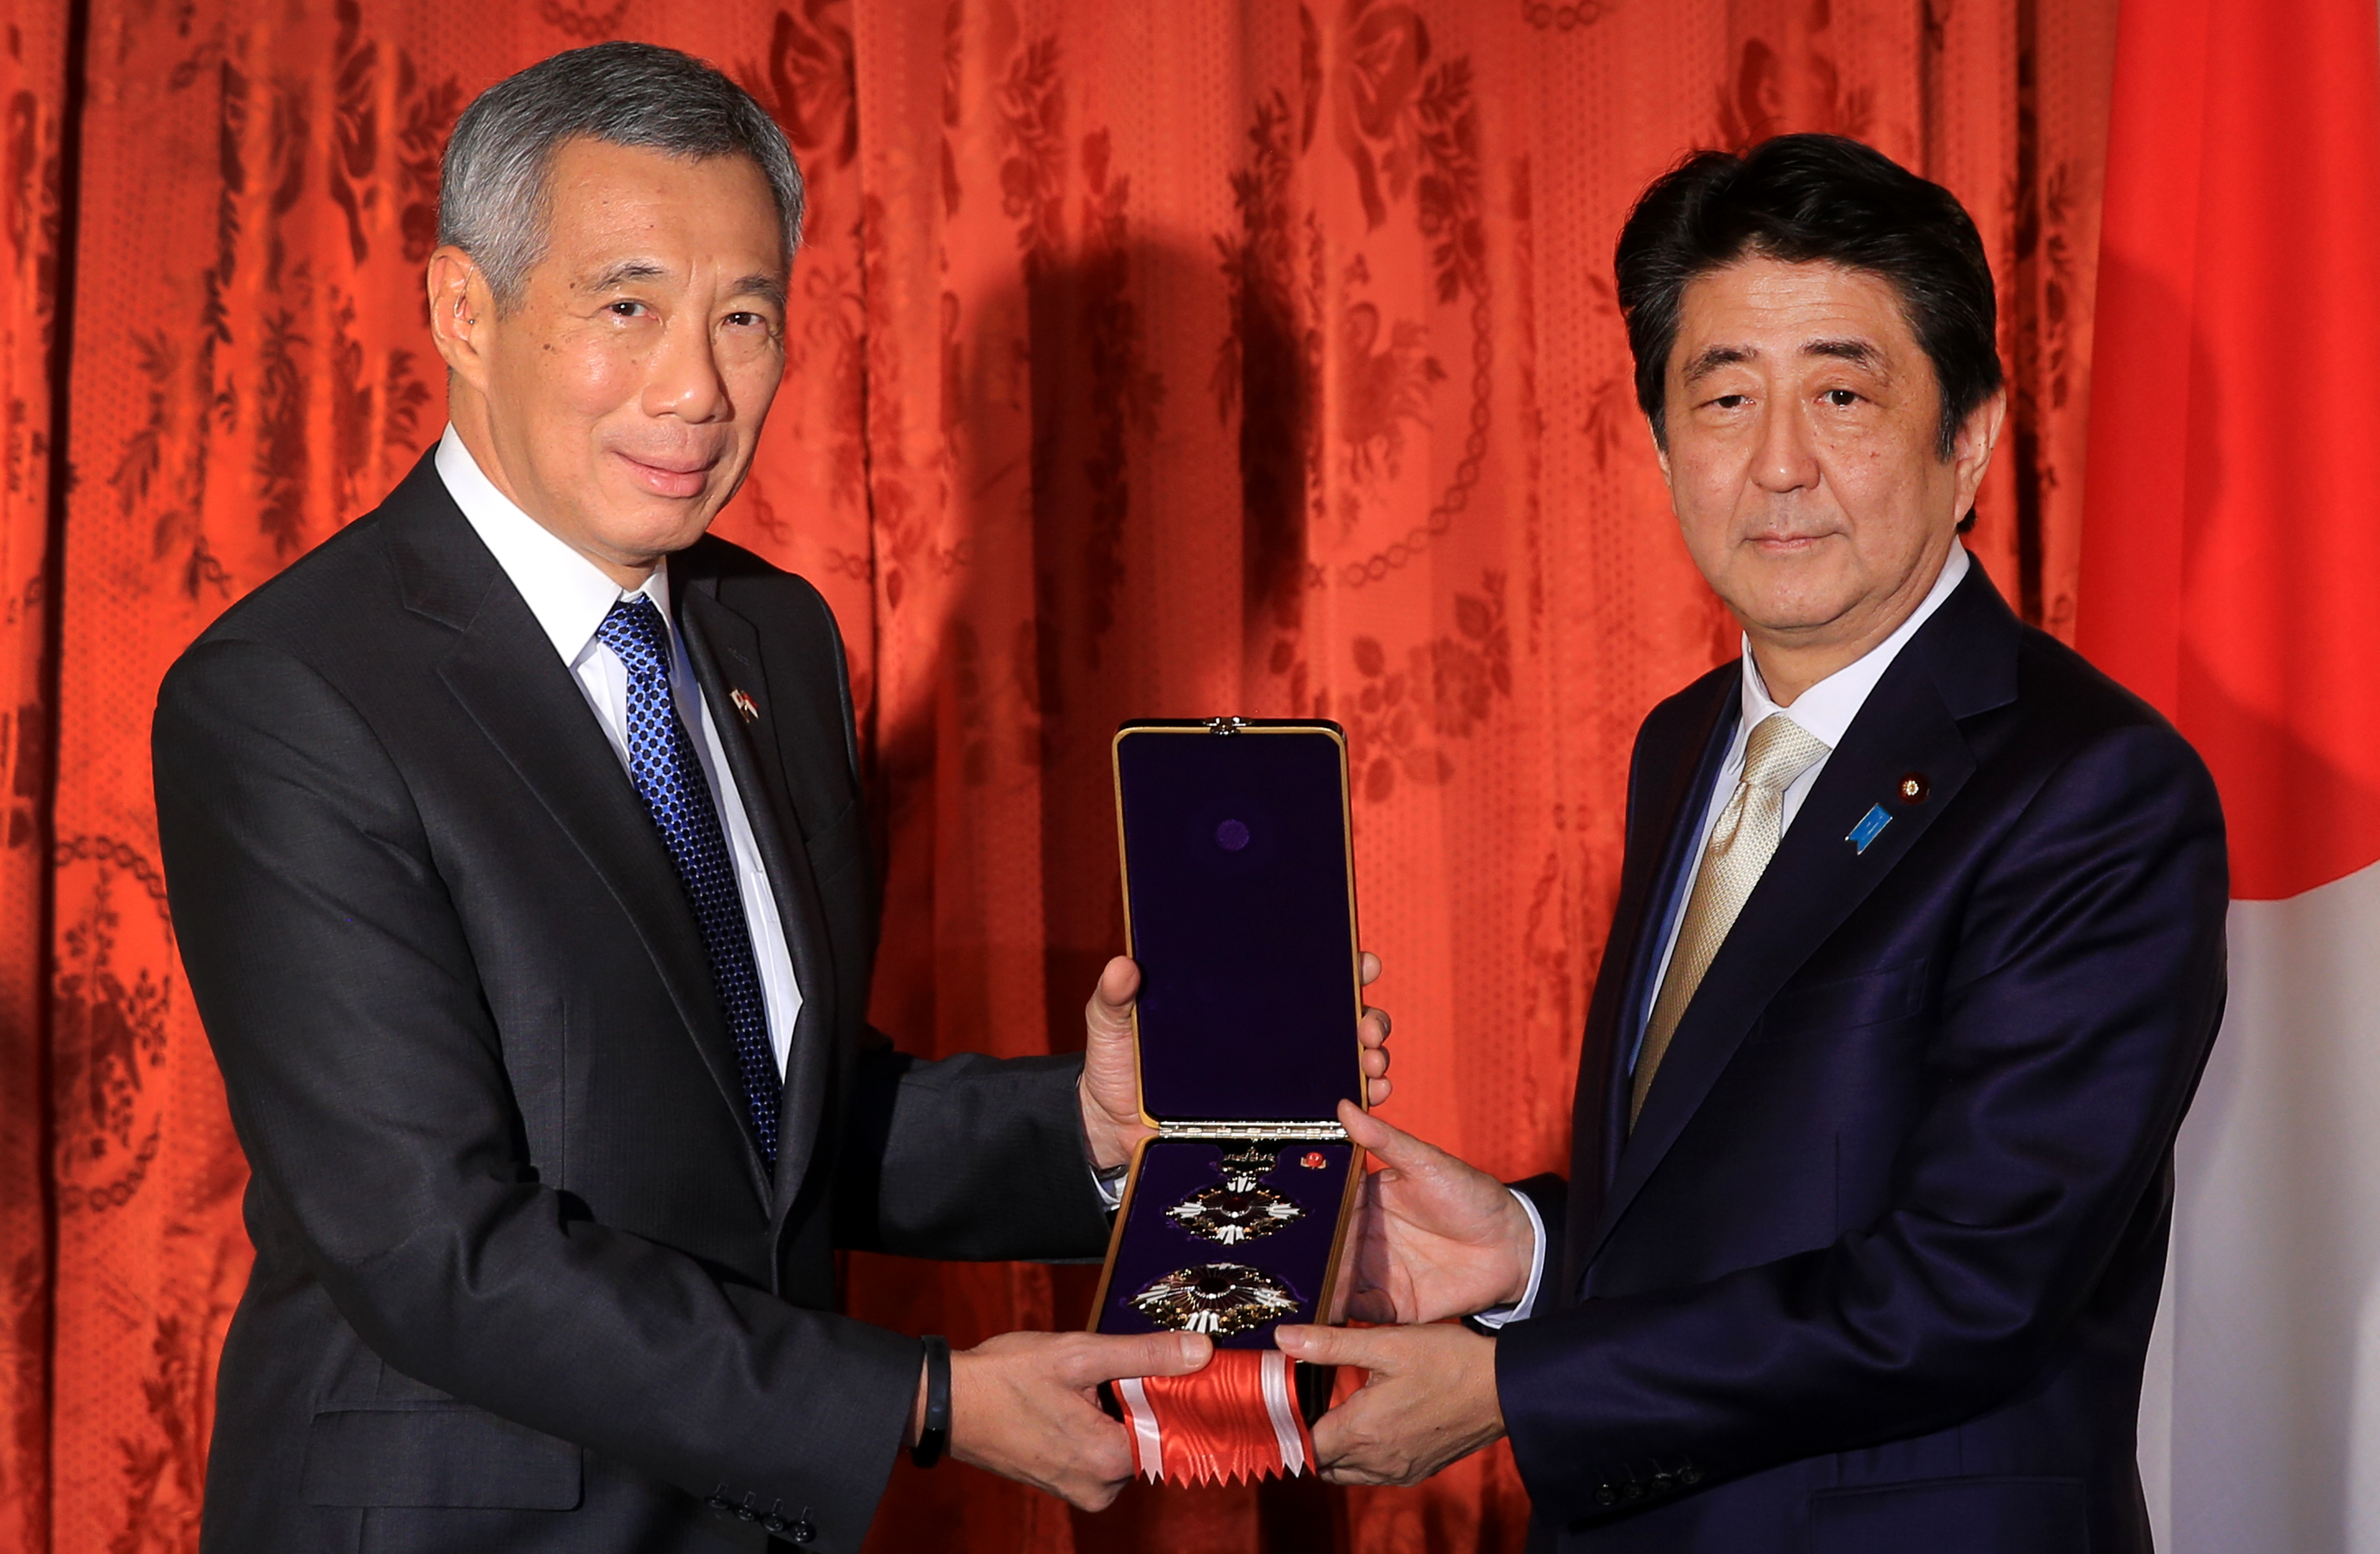 PM Lee Hsien Loong's Remarks at the Joint Press Conference with PM Shinzo Abe in Tokyo, Japan